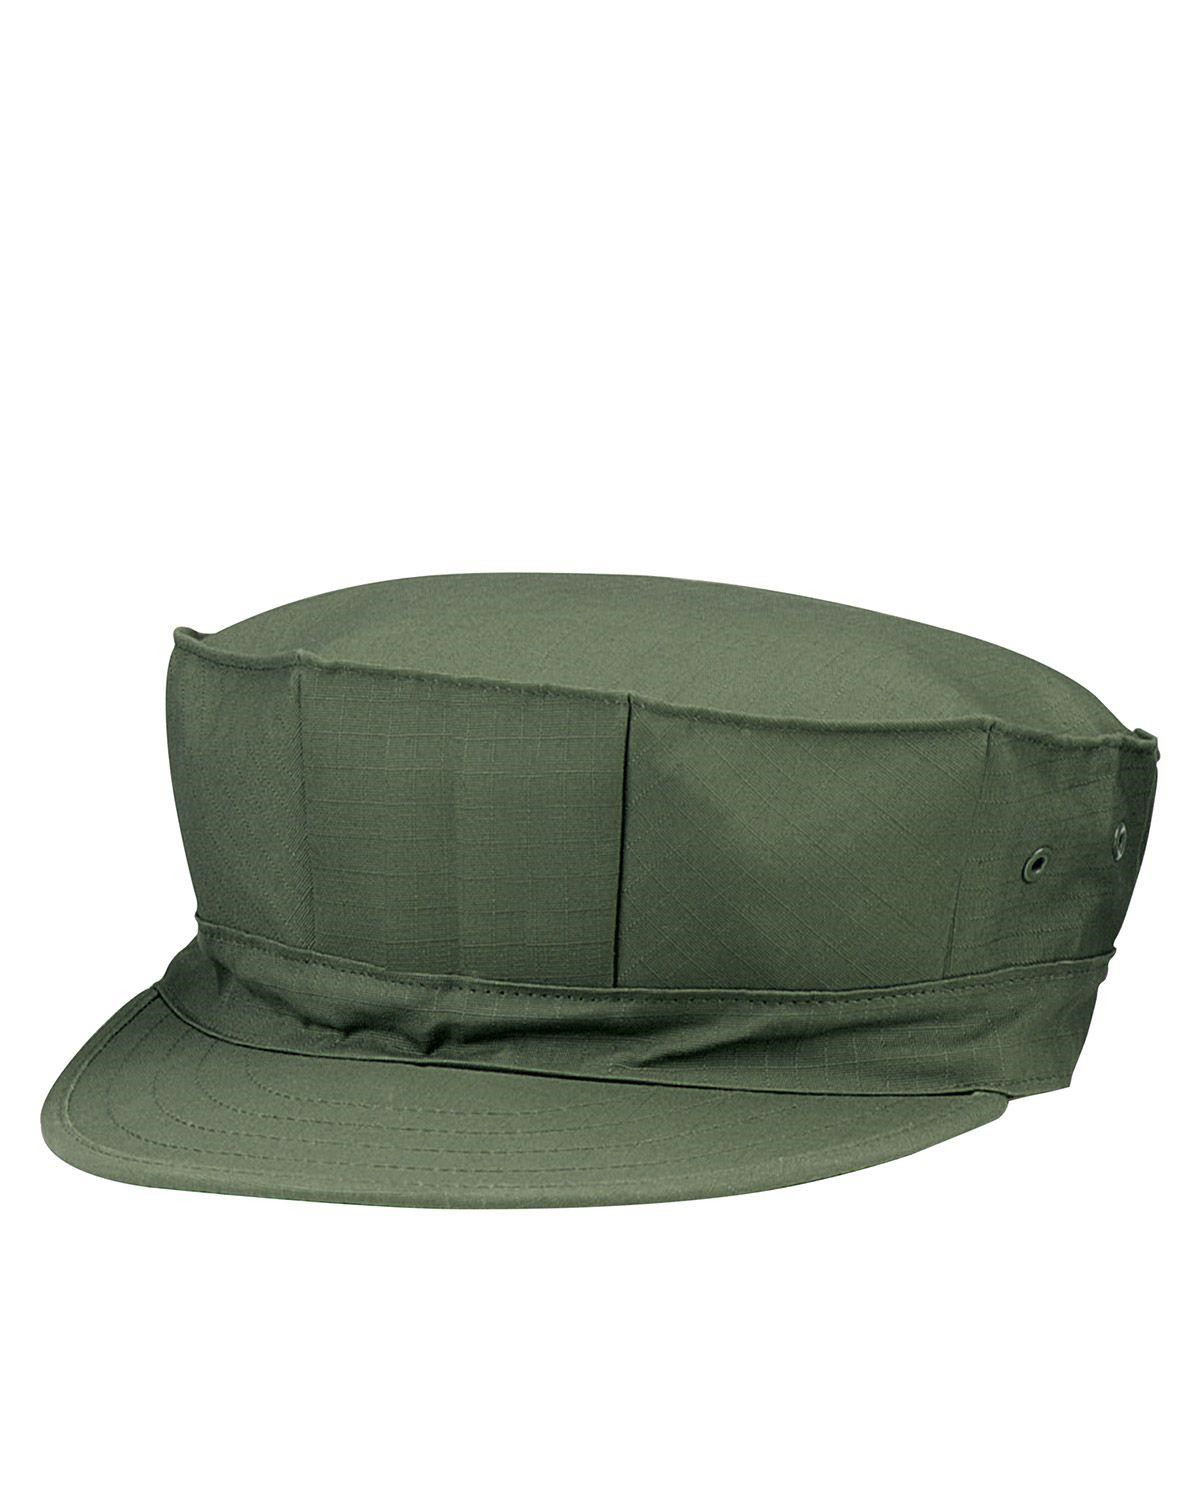 Rothco US Marine Corps Cap - Poly/Bomuld (Oliven, M)